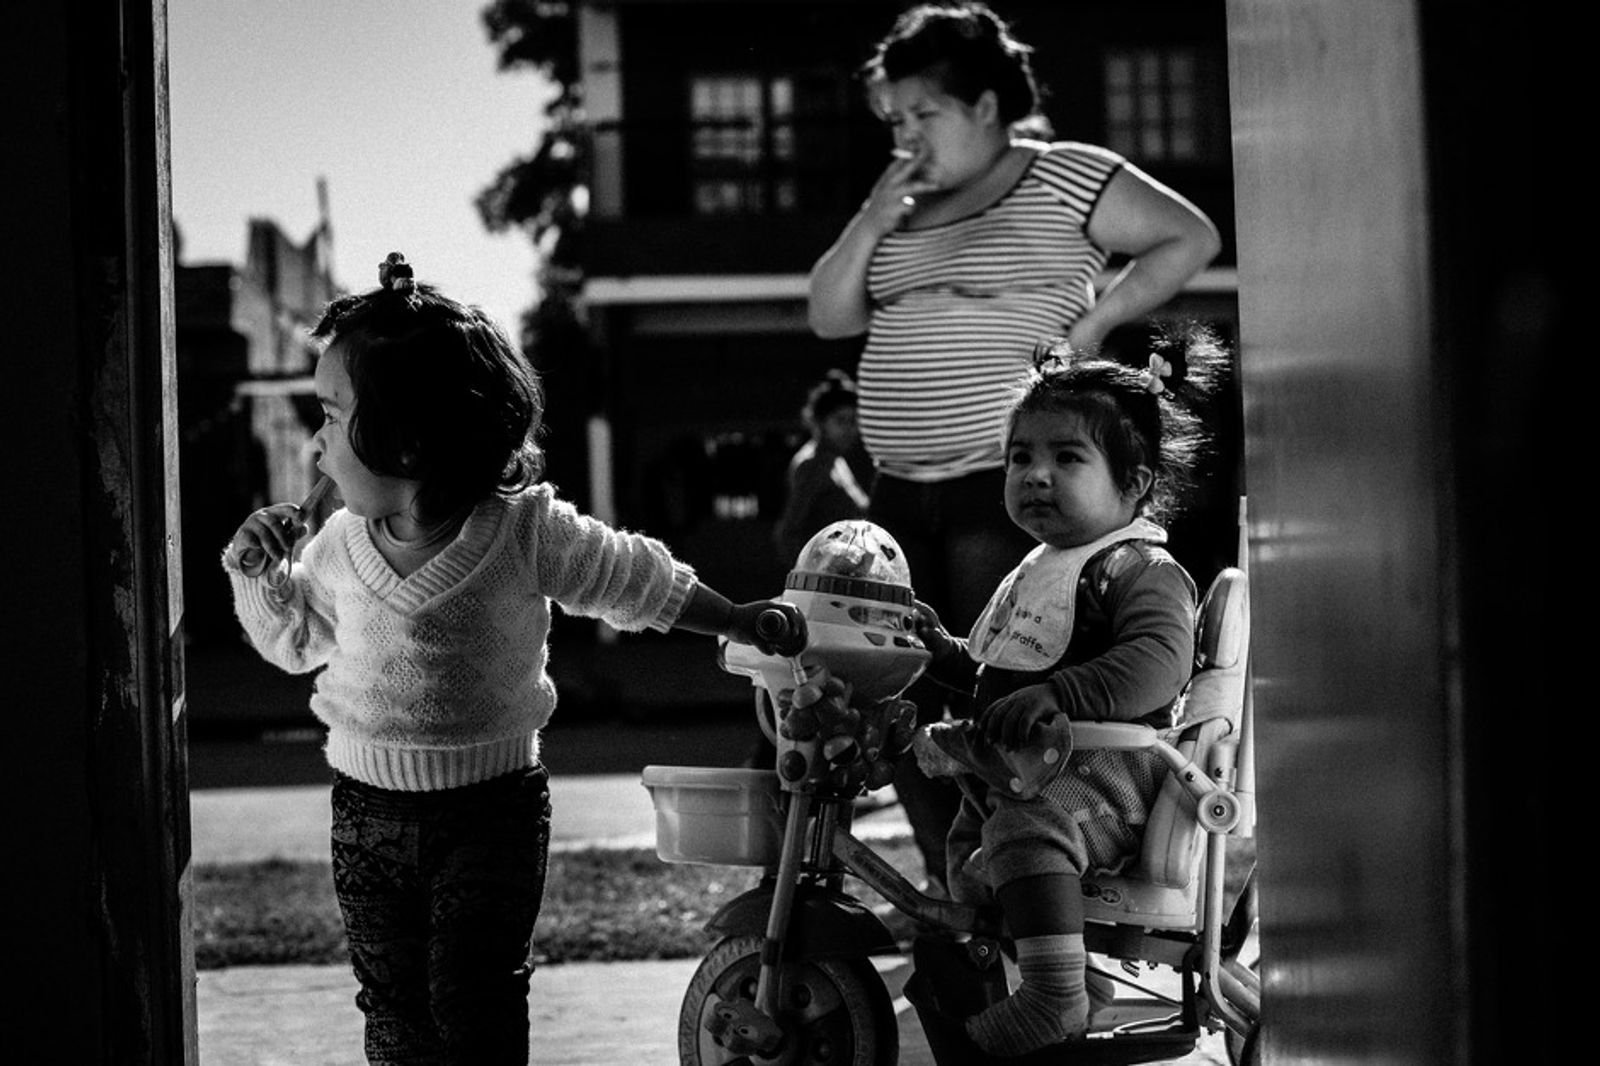 © Sarah Pabst - Stefi smokes a cigarette on the street in Monte Chingolo, while Maite and Mia play together.